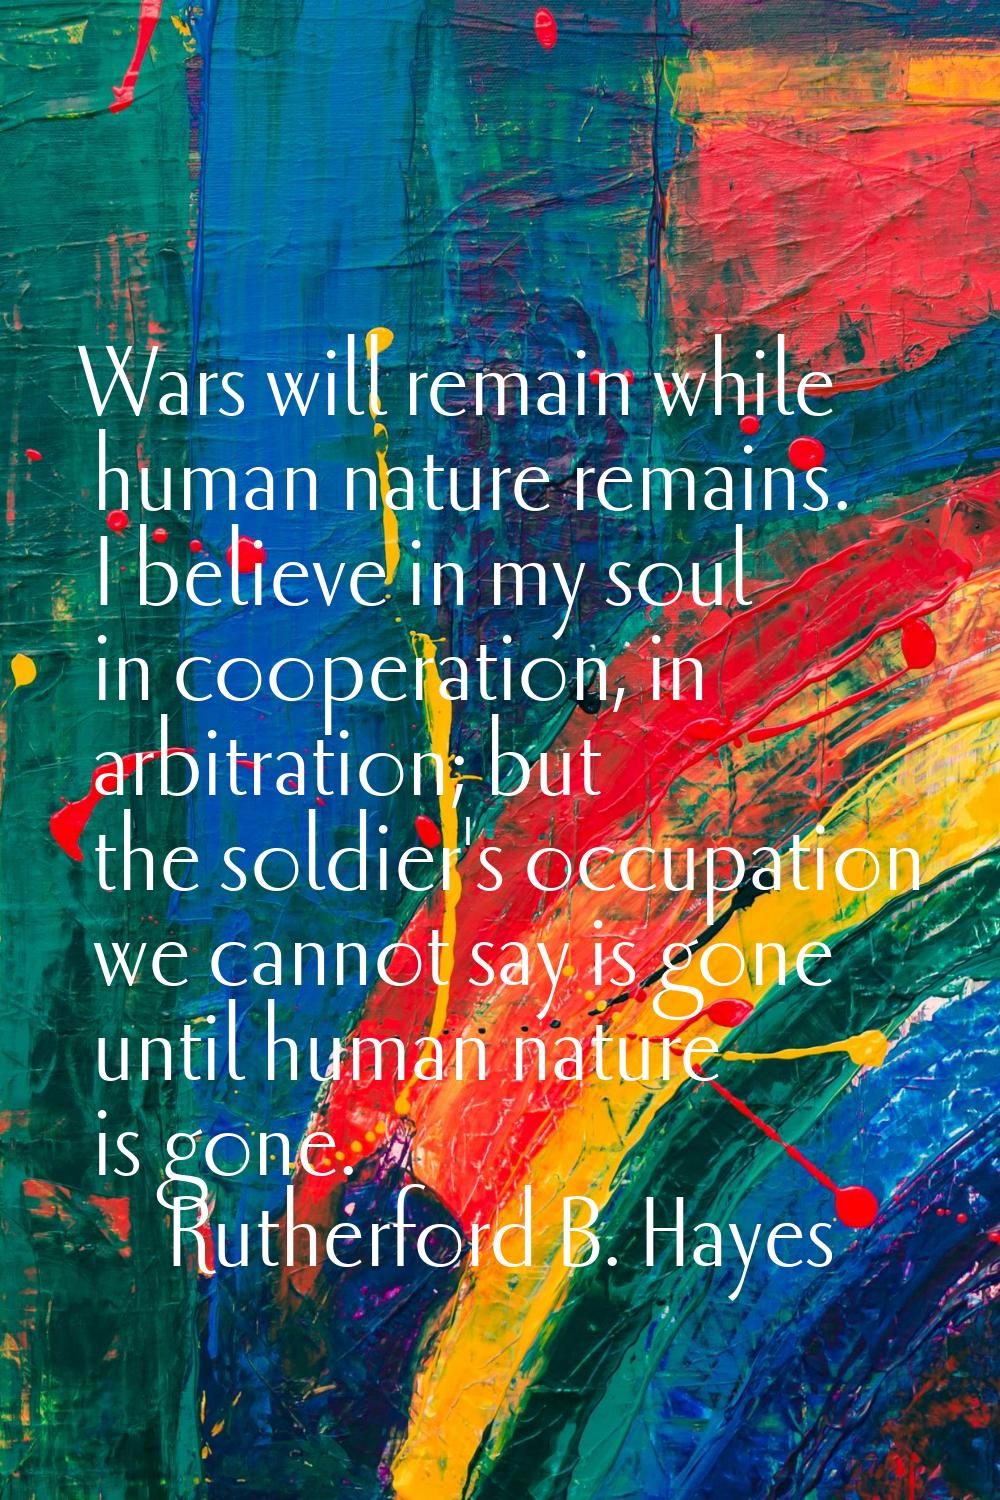 Wars will remain while human nature remains. I believe in my soul in cooperation, in arbitration; b